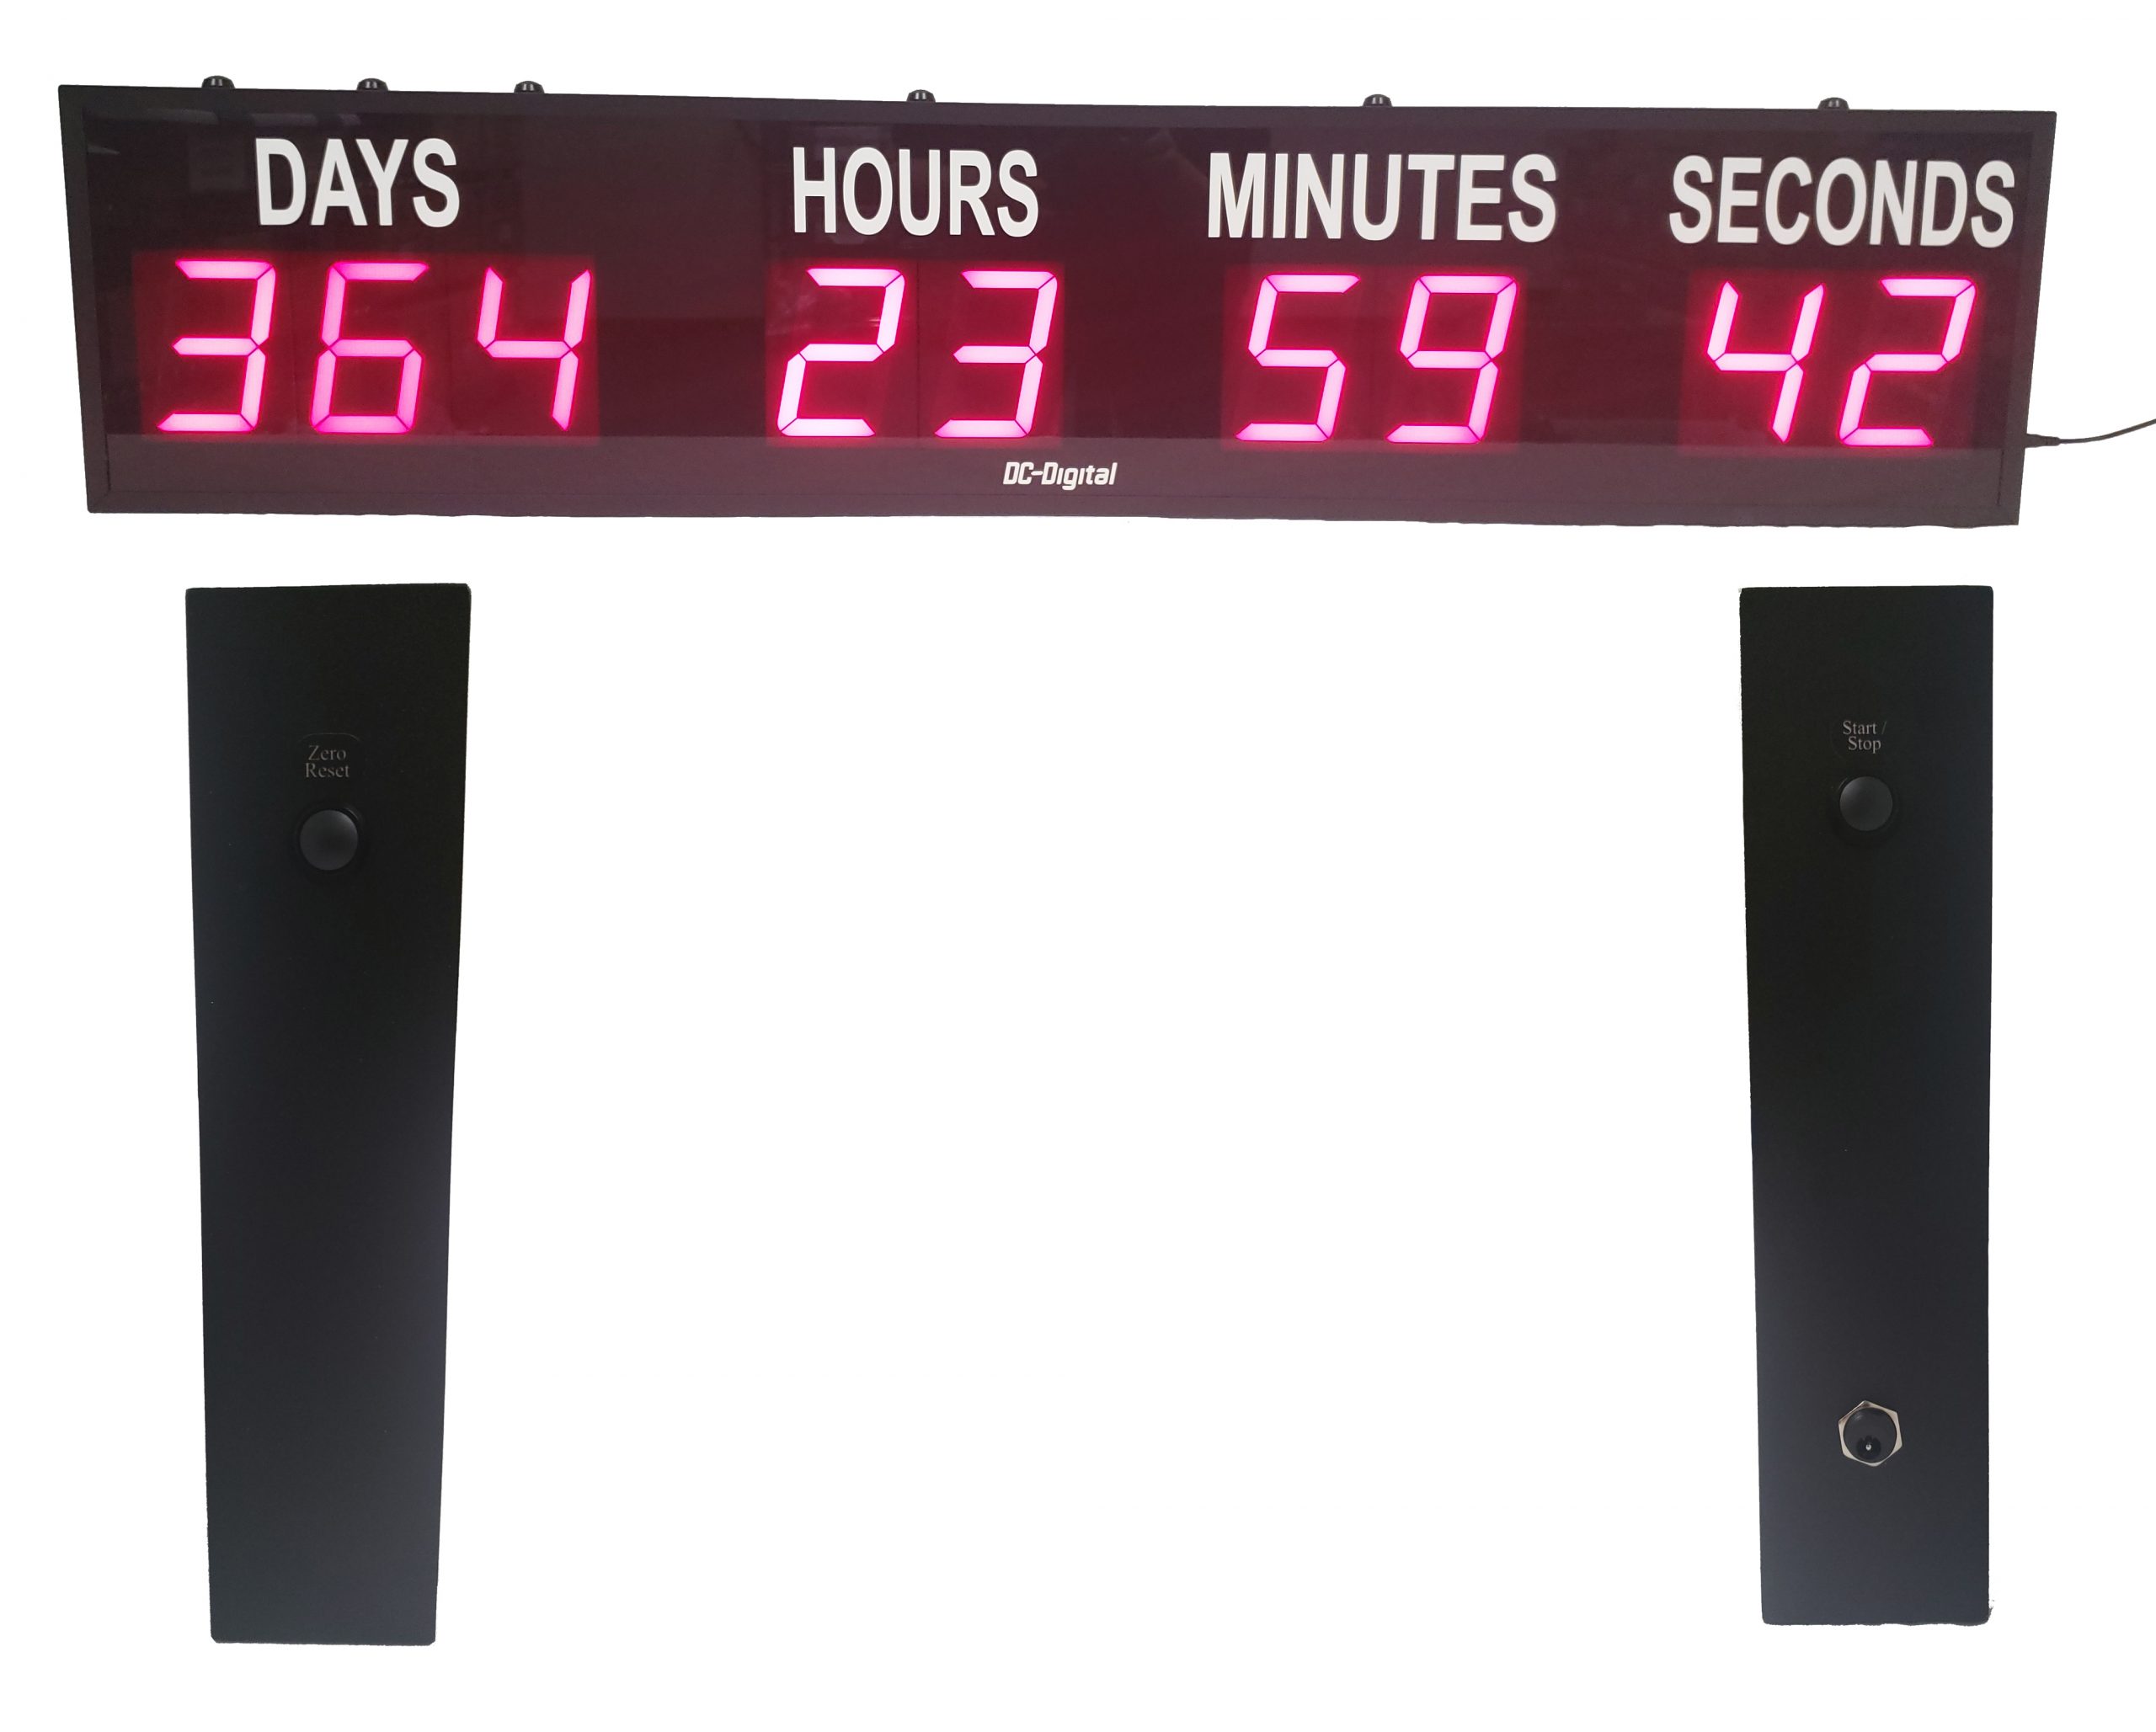 100 Minutes (1hr. 40min.) countdown Timer - Beep at the end